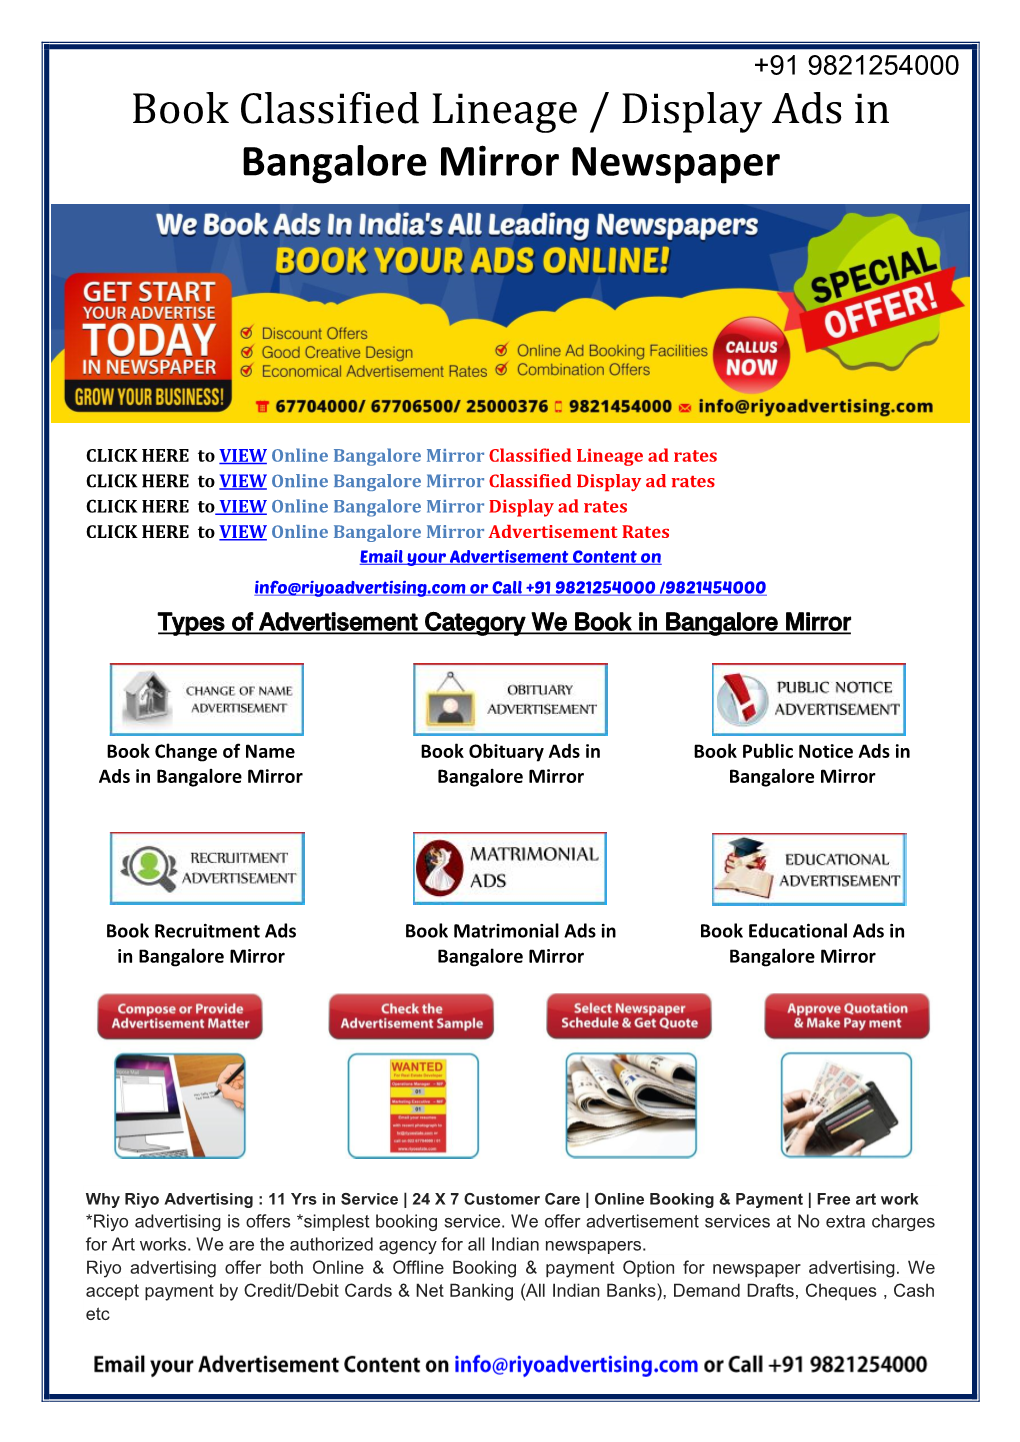 Book Classified Lineage / Display Ads in Bangalore Mirror Newspaper